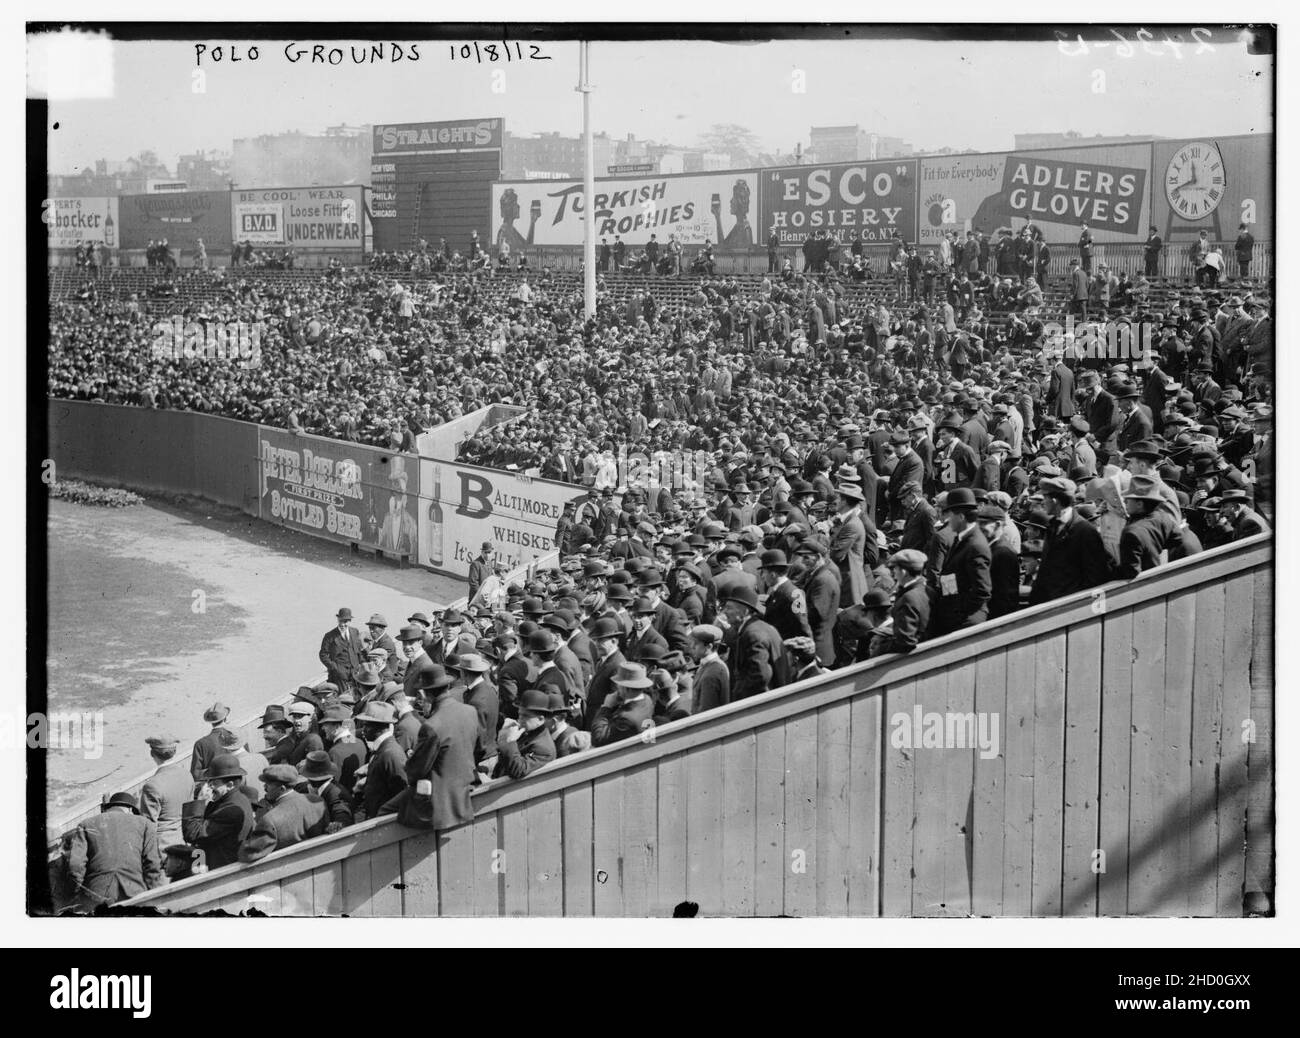 Right field grandstand at Polo Grounds - 1912 World Series (baseball) Stock Photo